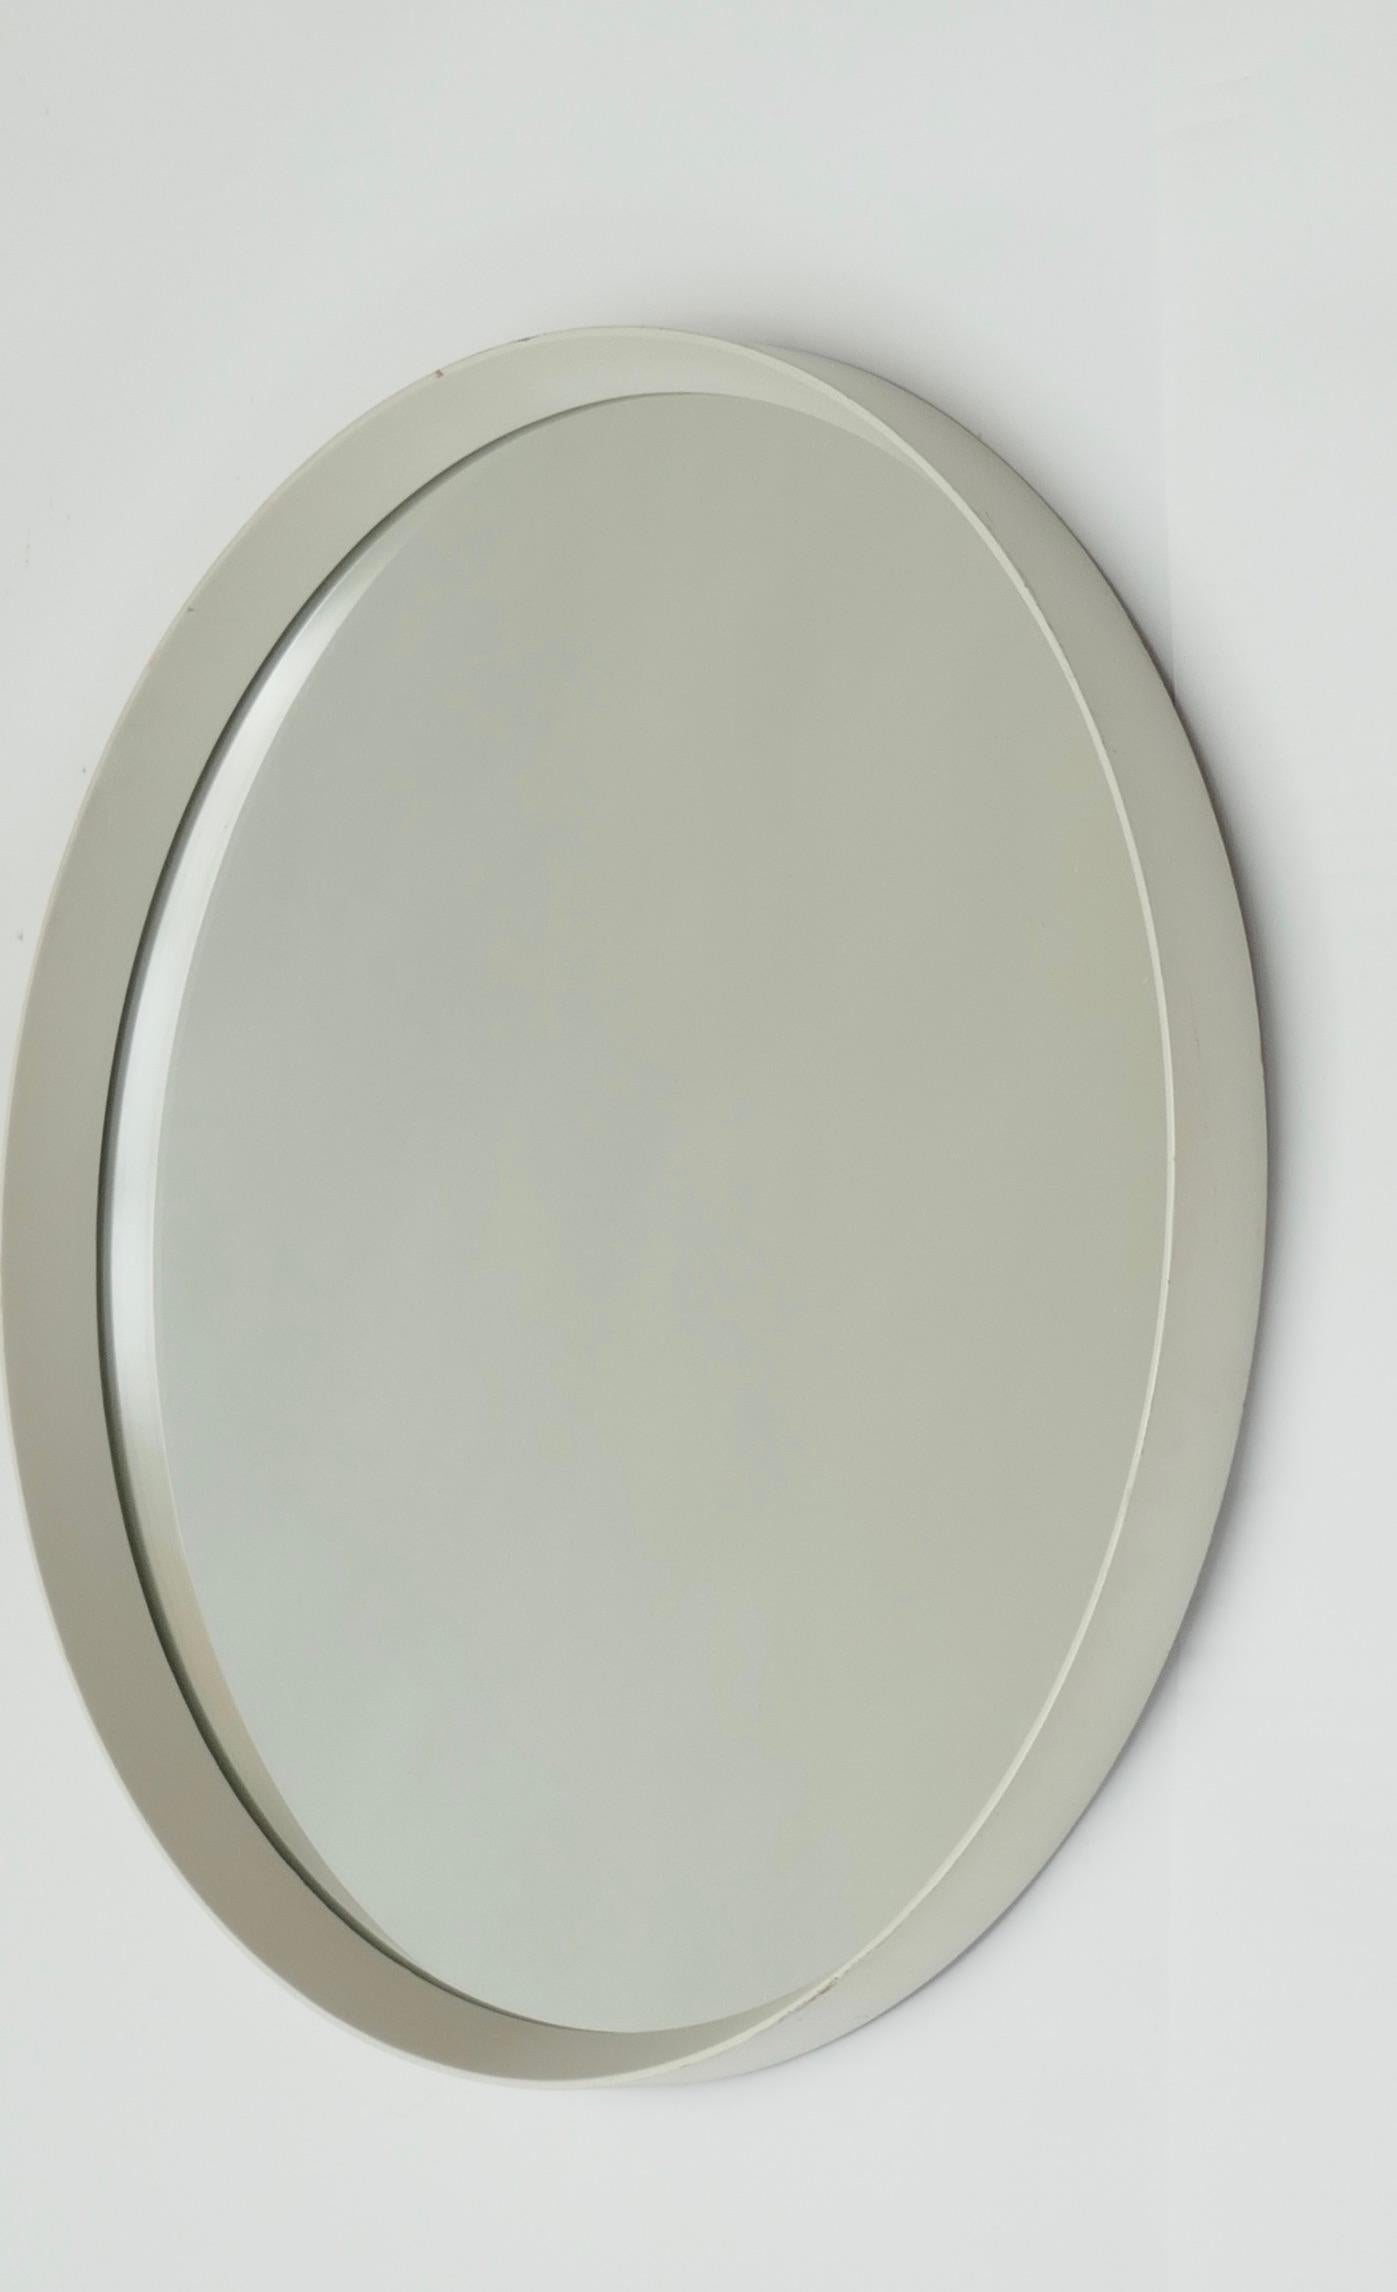 Minimalist Round Mirror with a  Wood White Lacquered  Frame, Germany 1970s